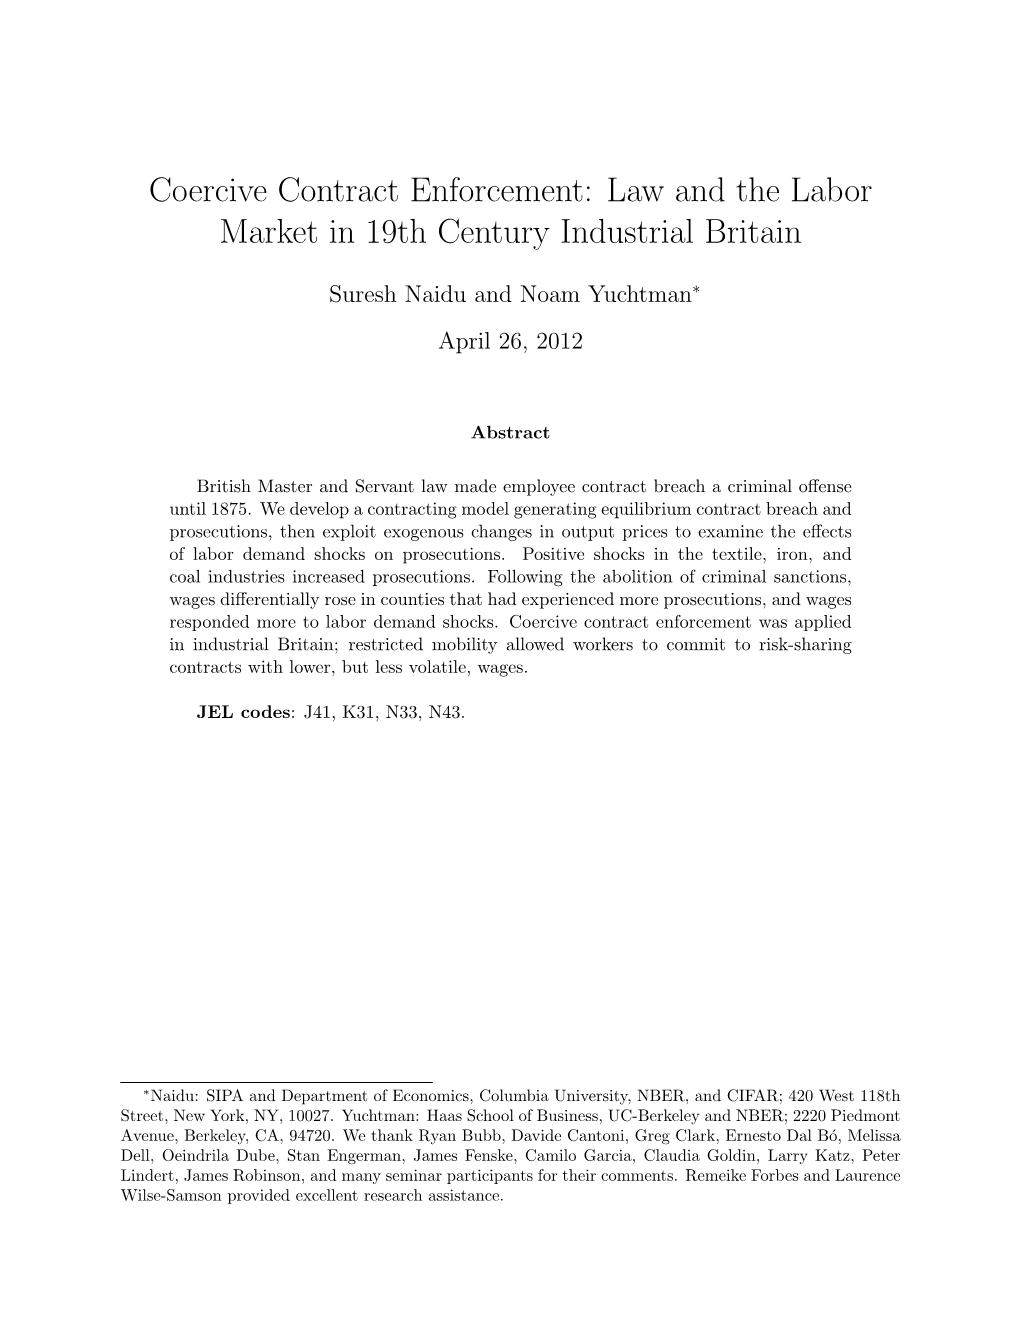 Coercive Contract Enforcement: Law and the Labor Market in 19Th Century Industrial Britain